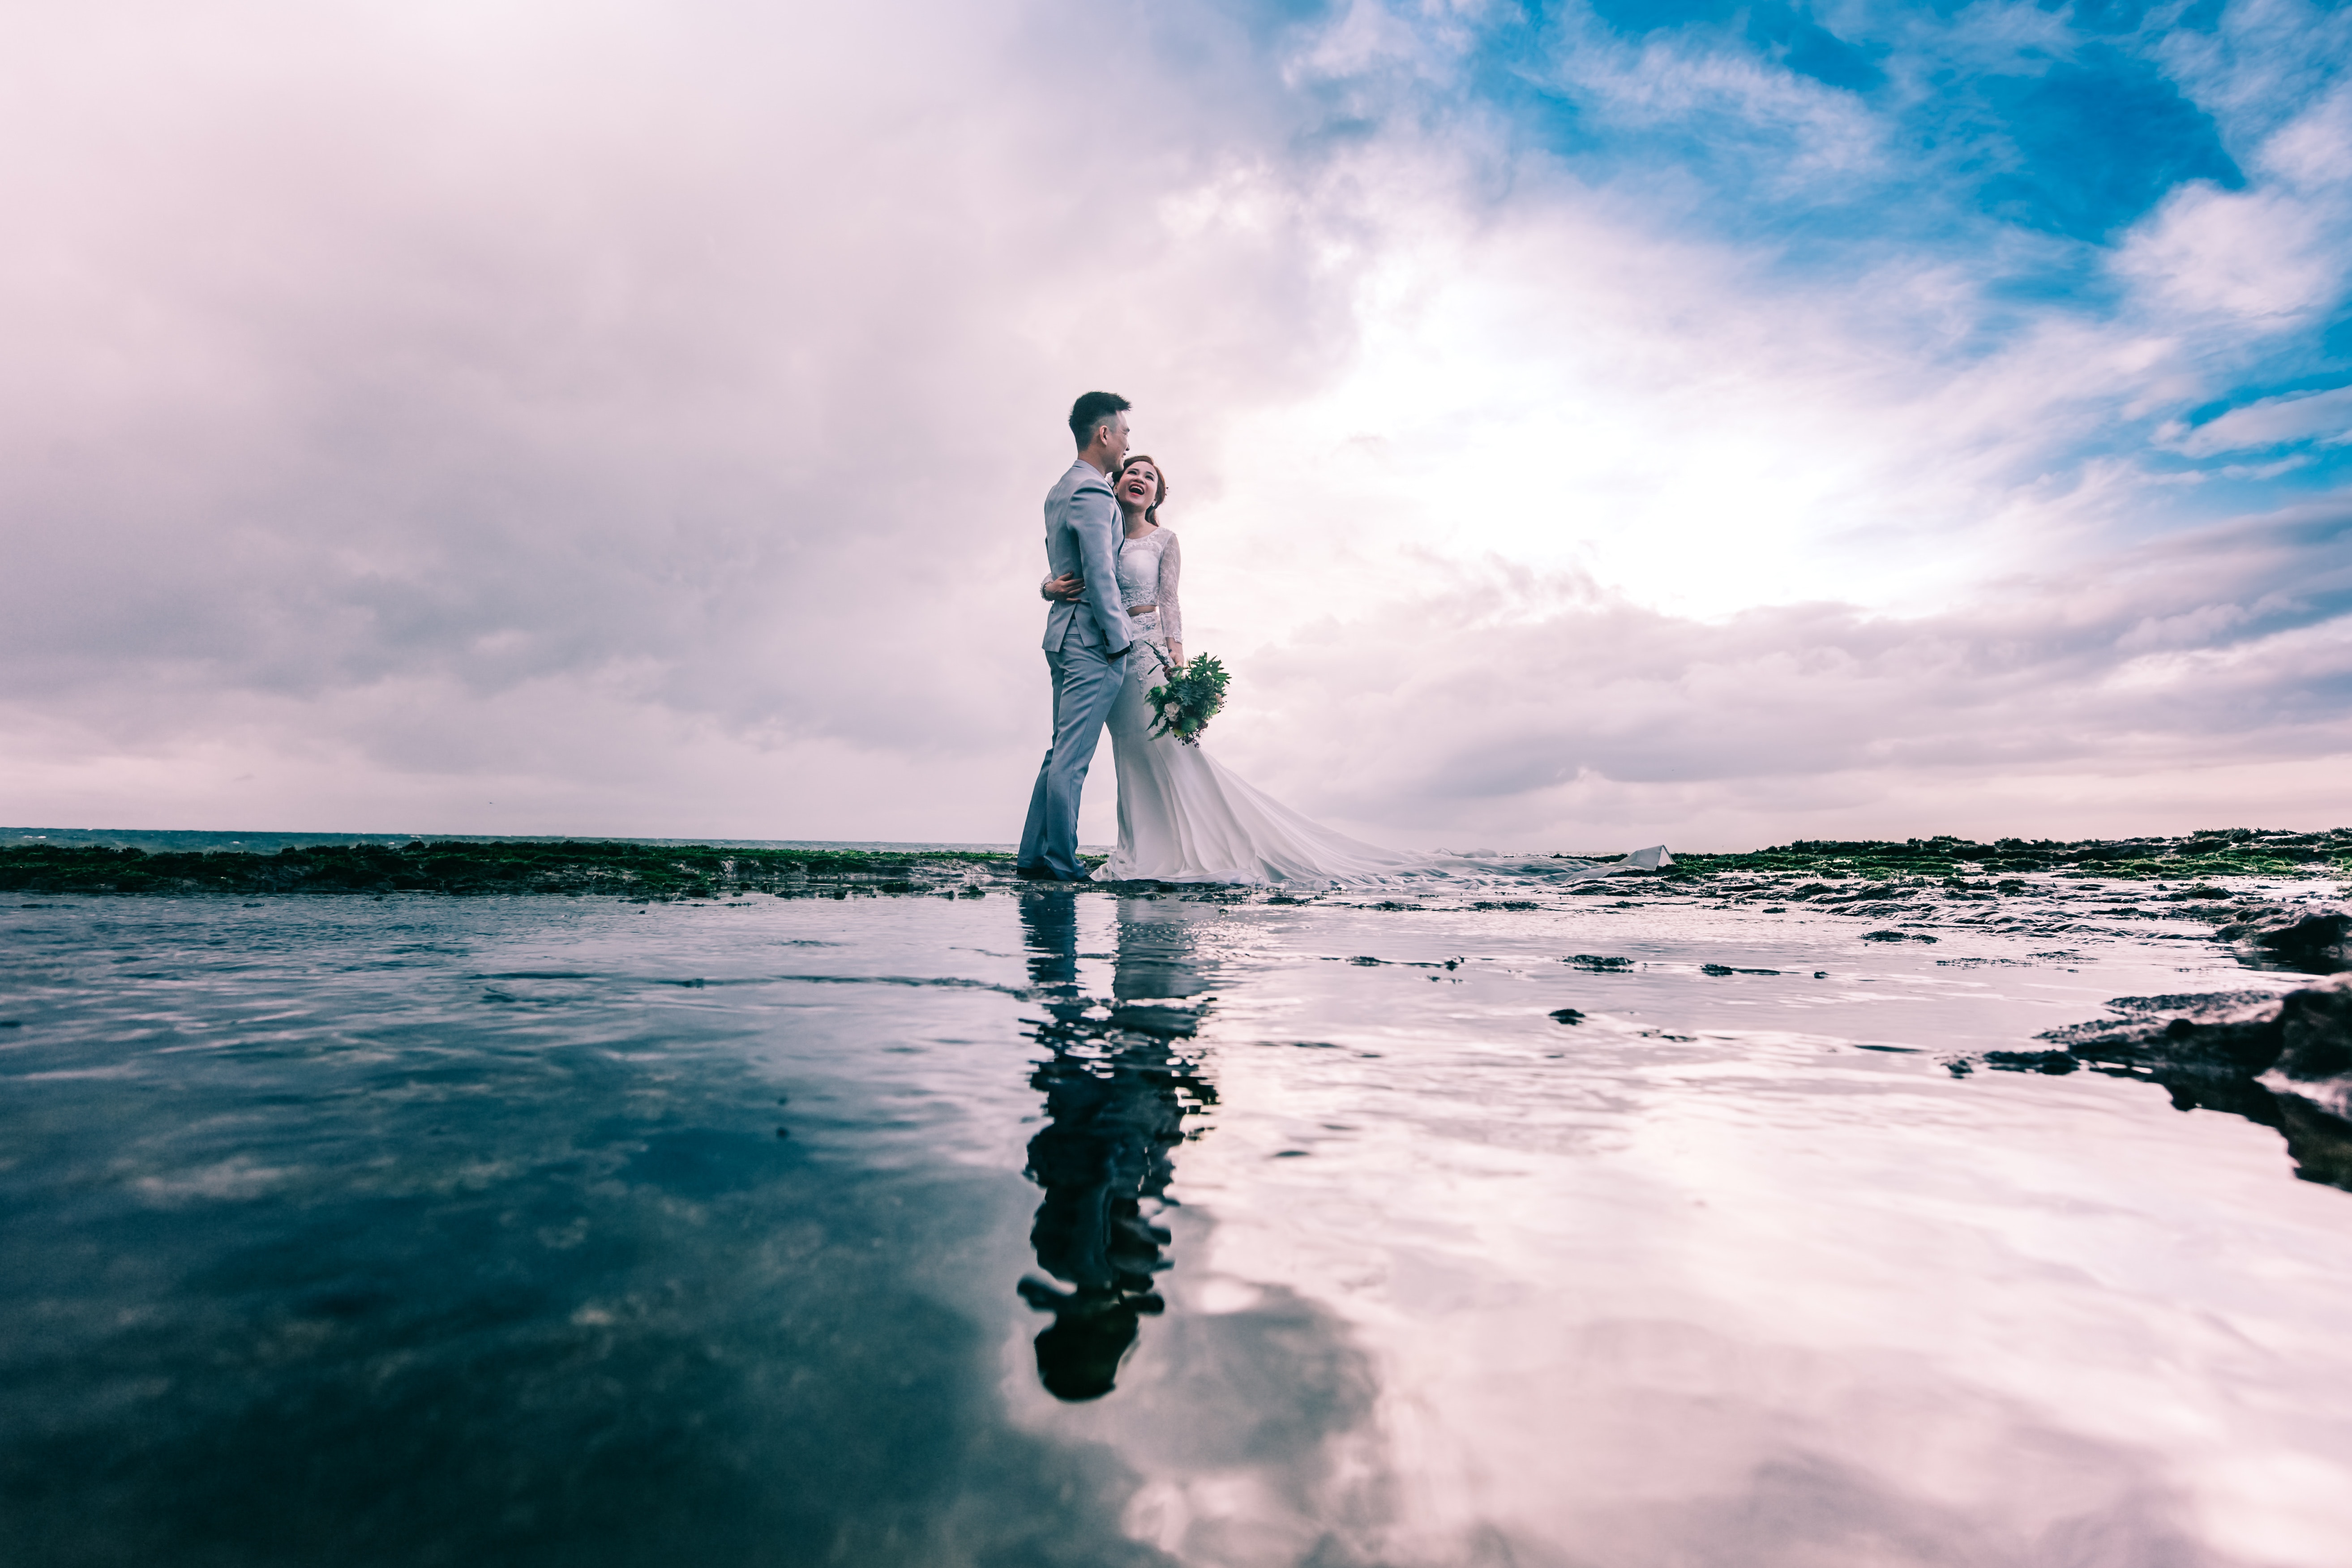 Your Wedding Day Photos: Perfected!